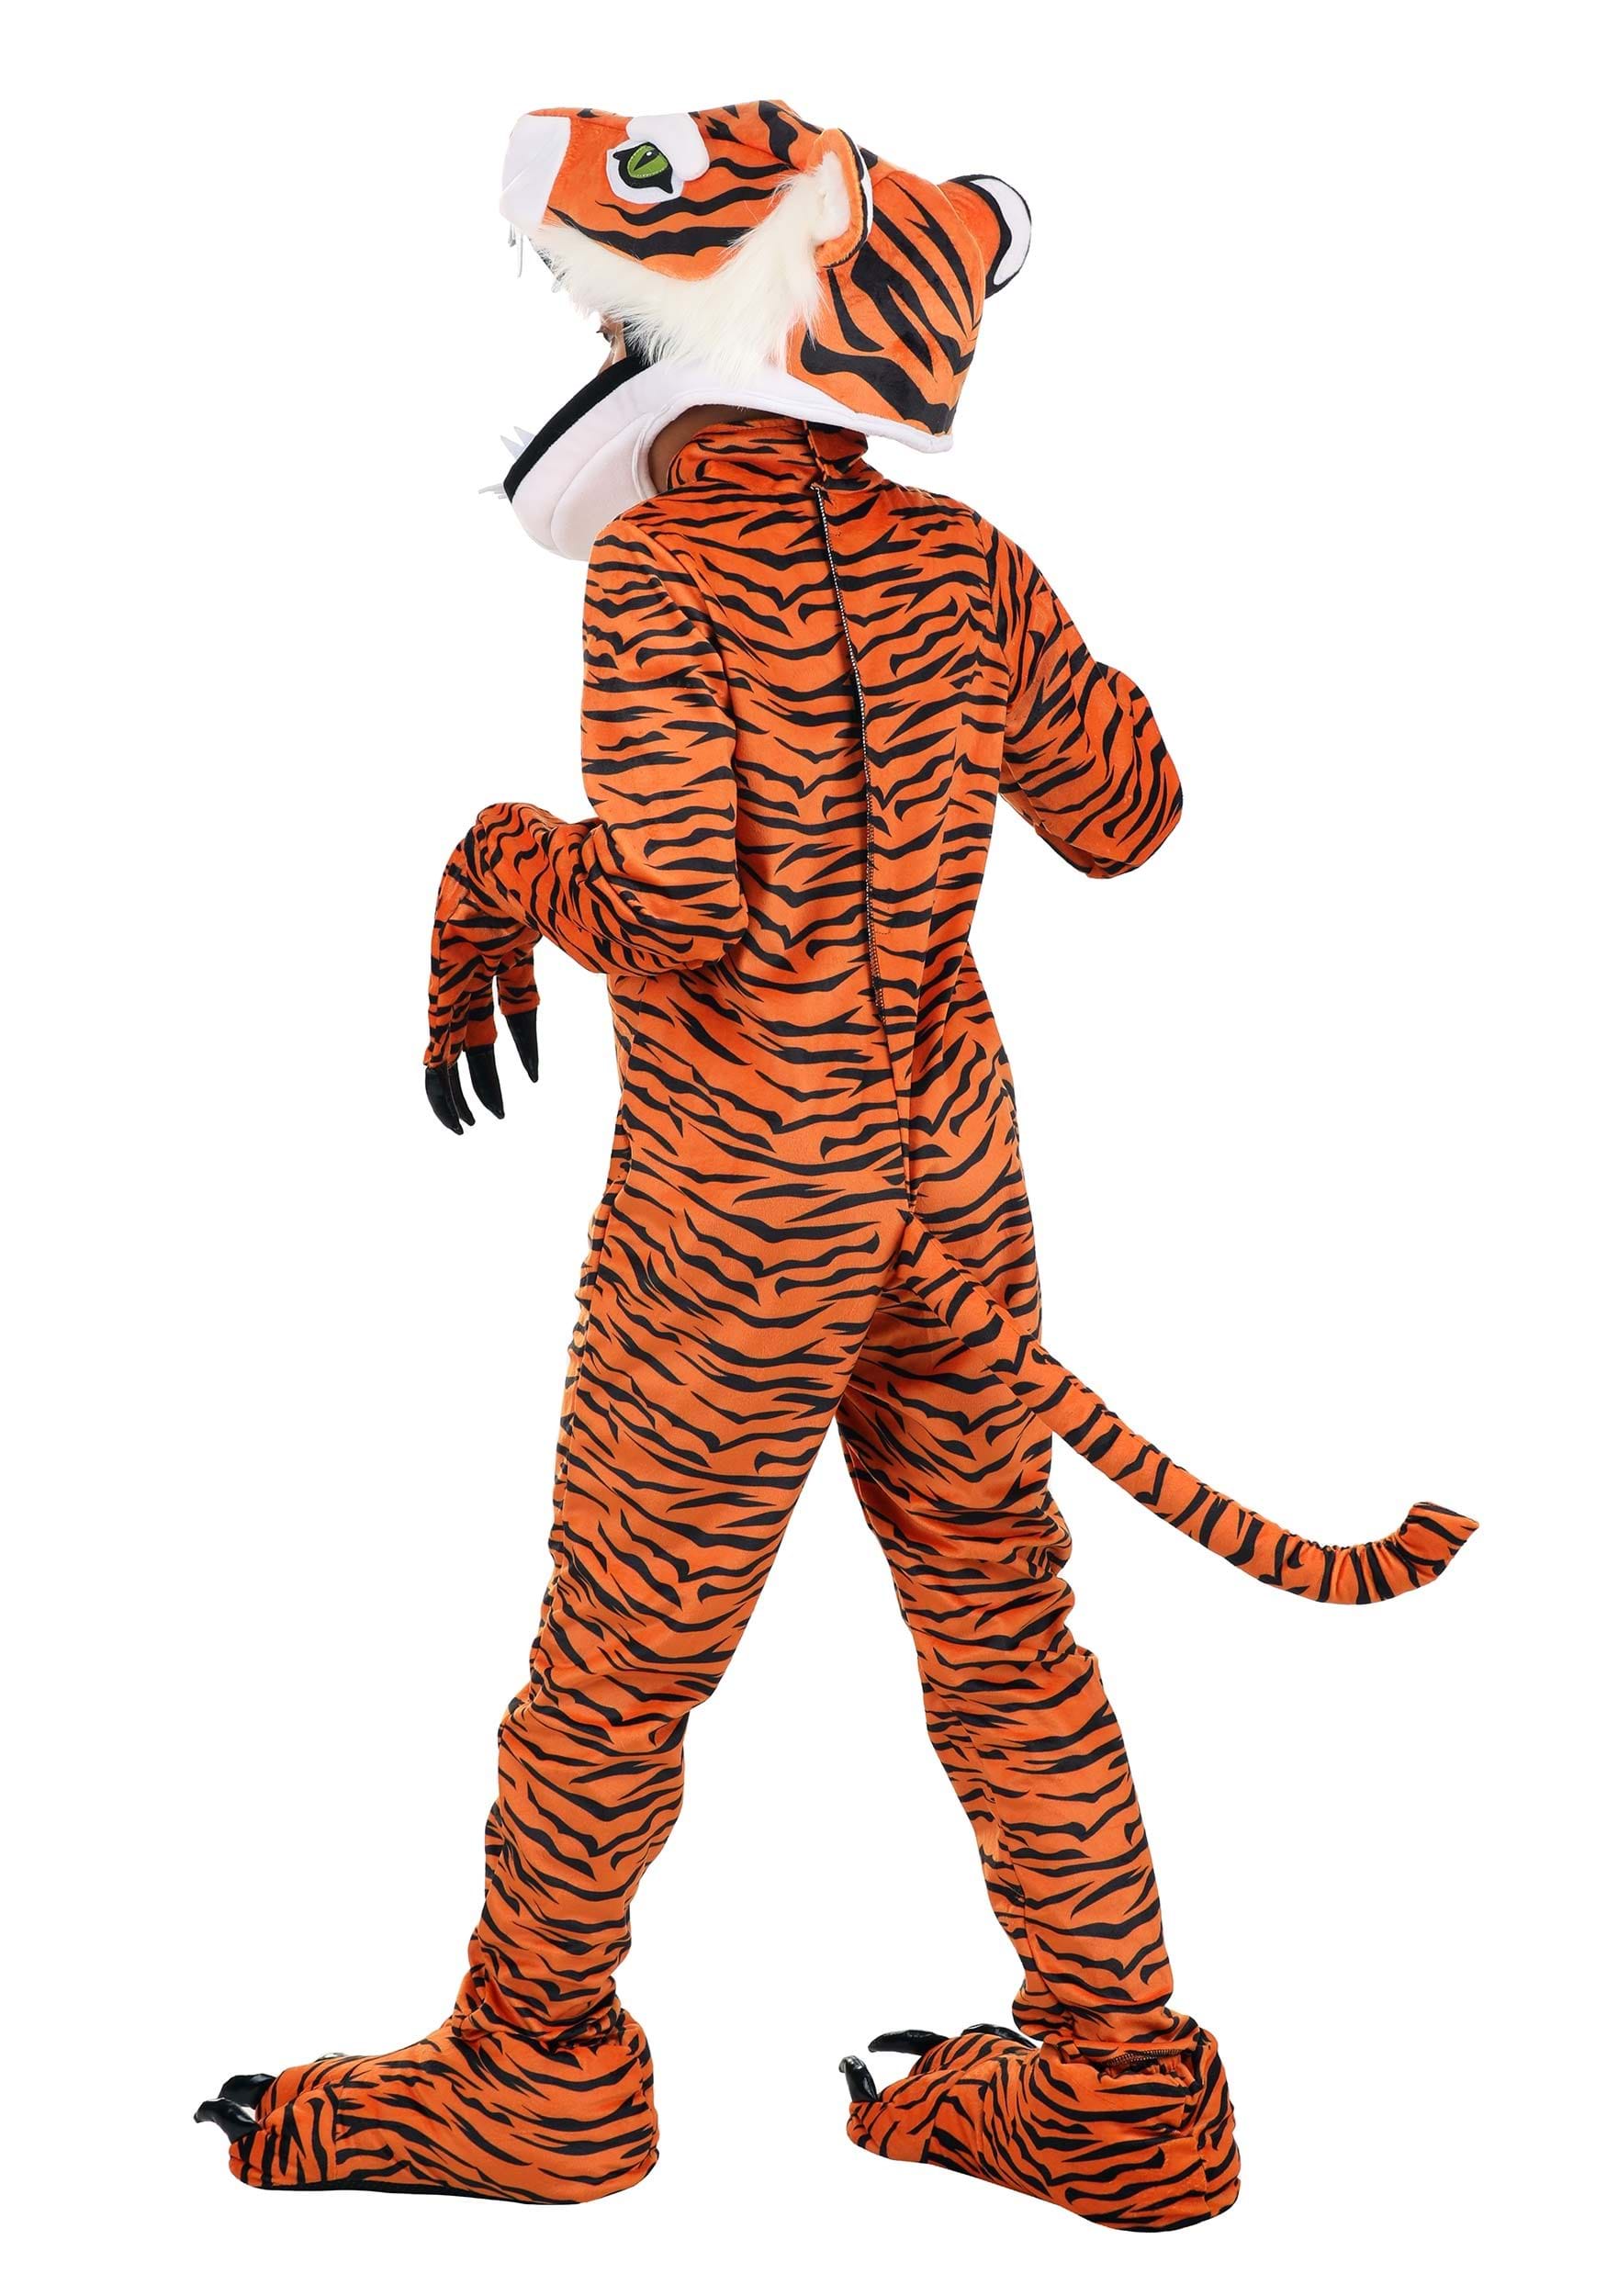 Tiger Jawesome Kid's Costume